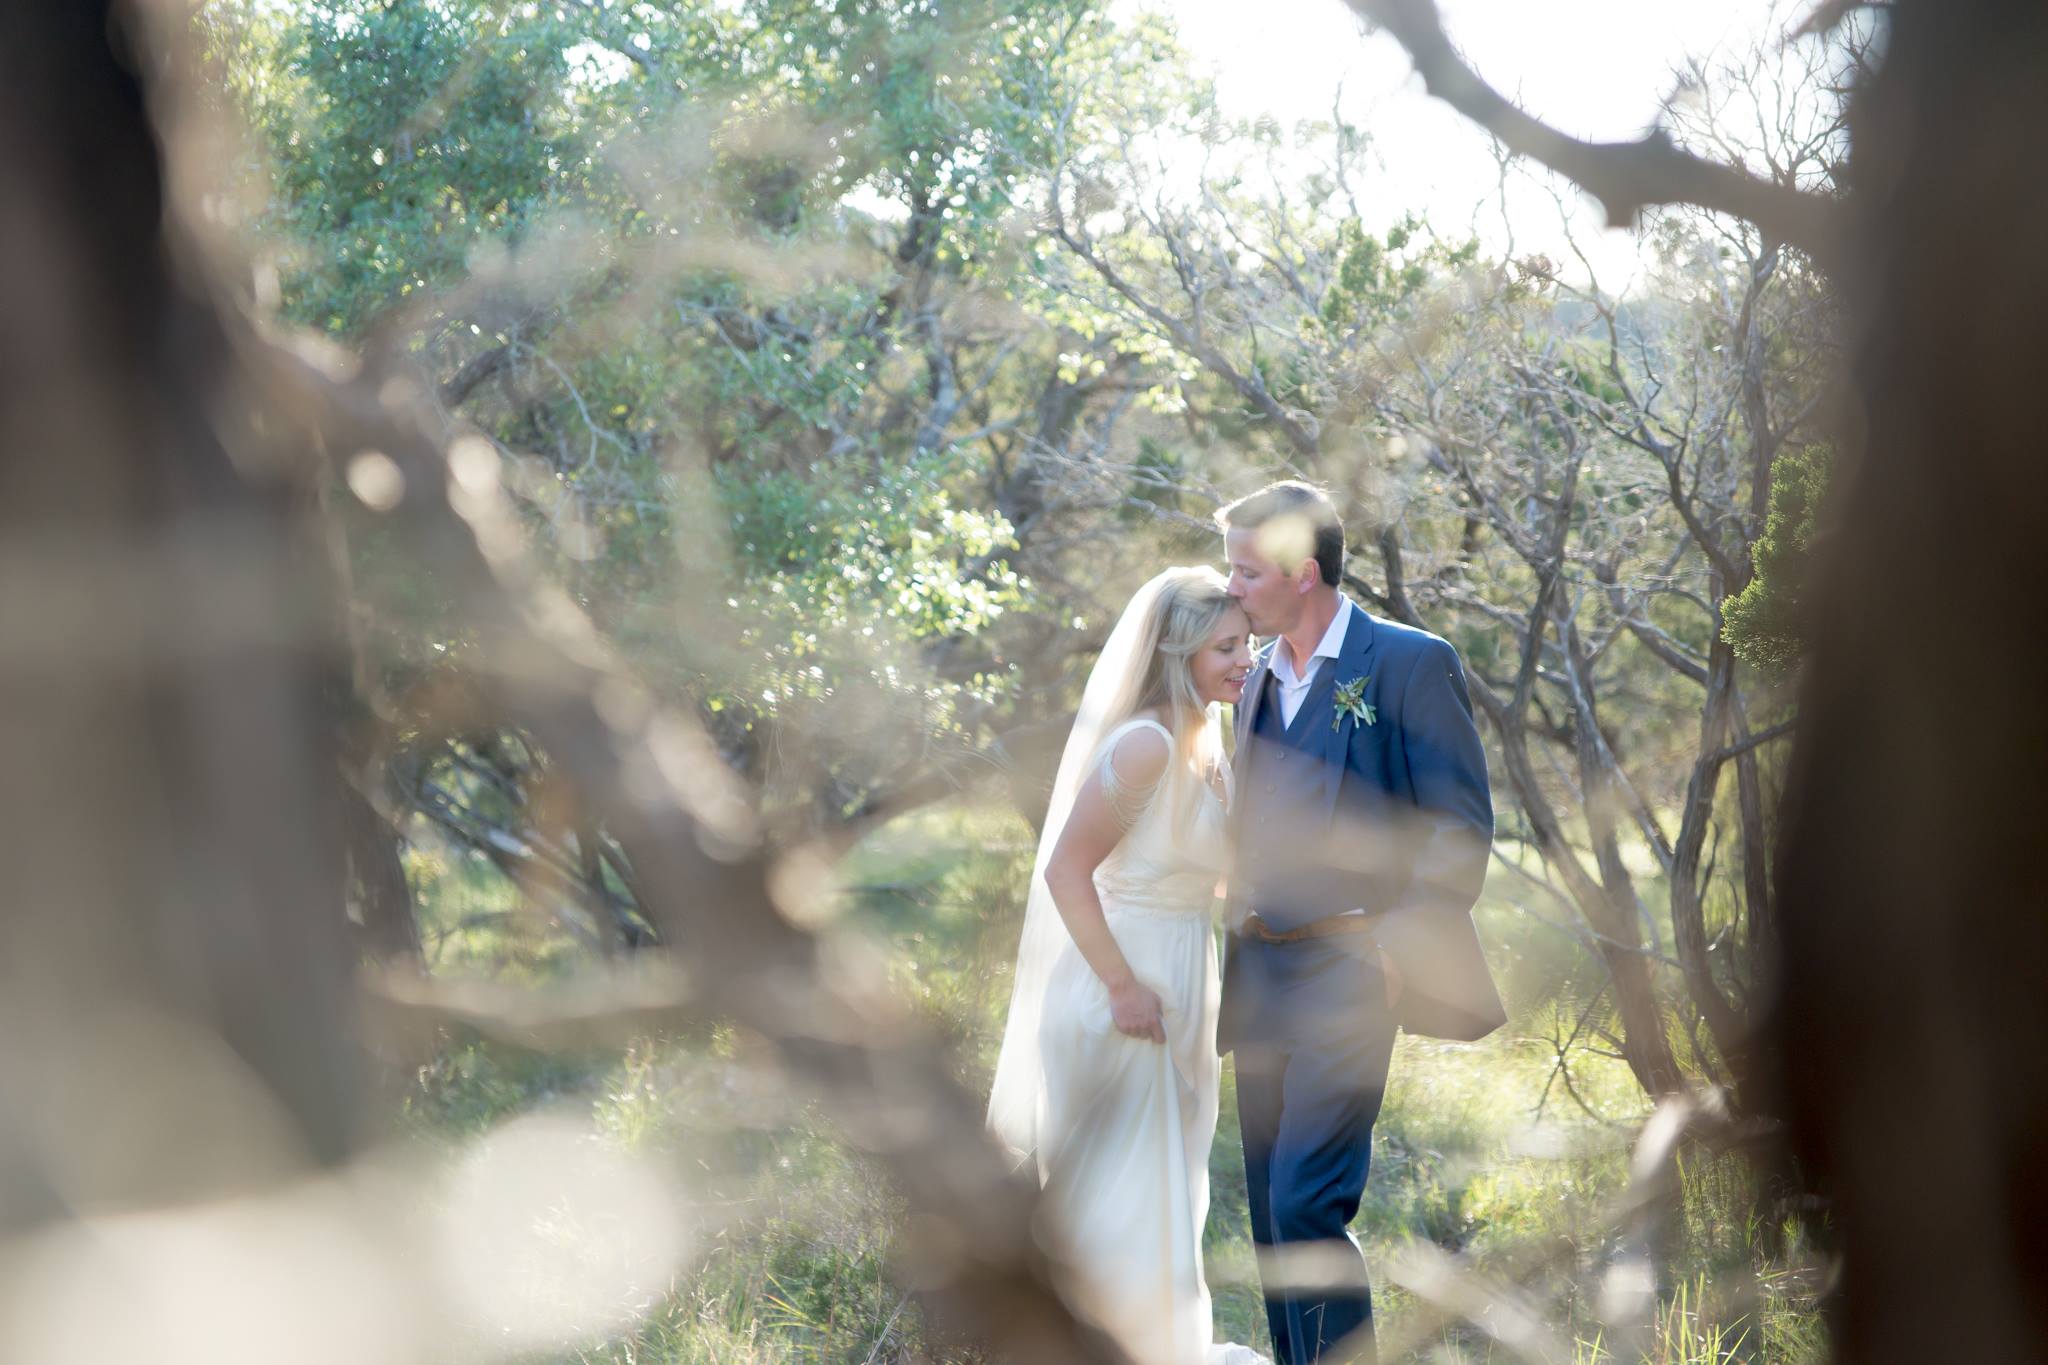 Jess and Jeff married at Chapel Dulcinea and